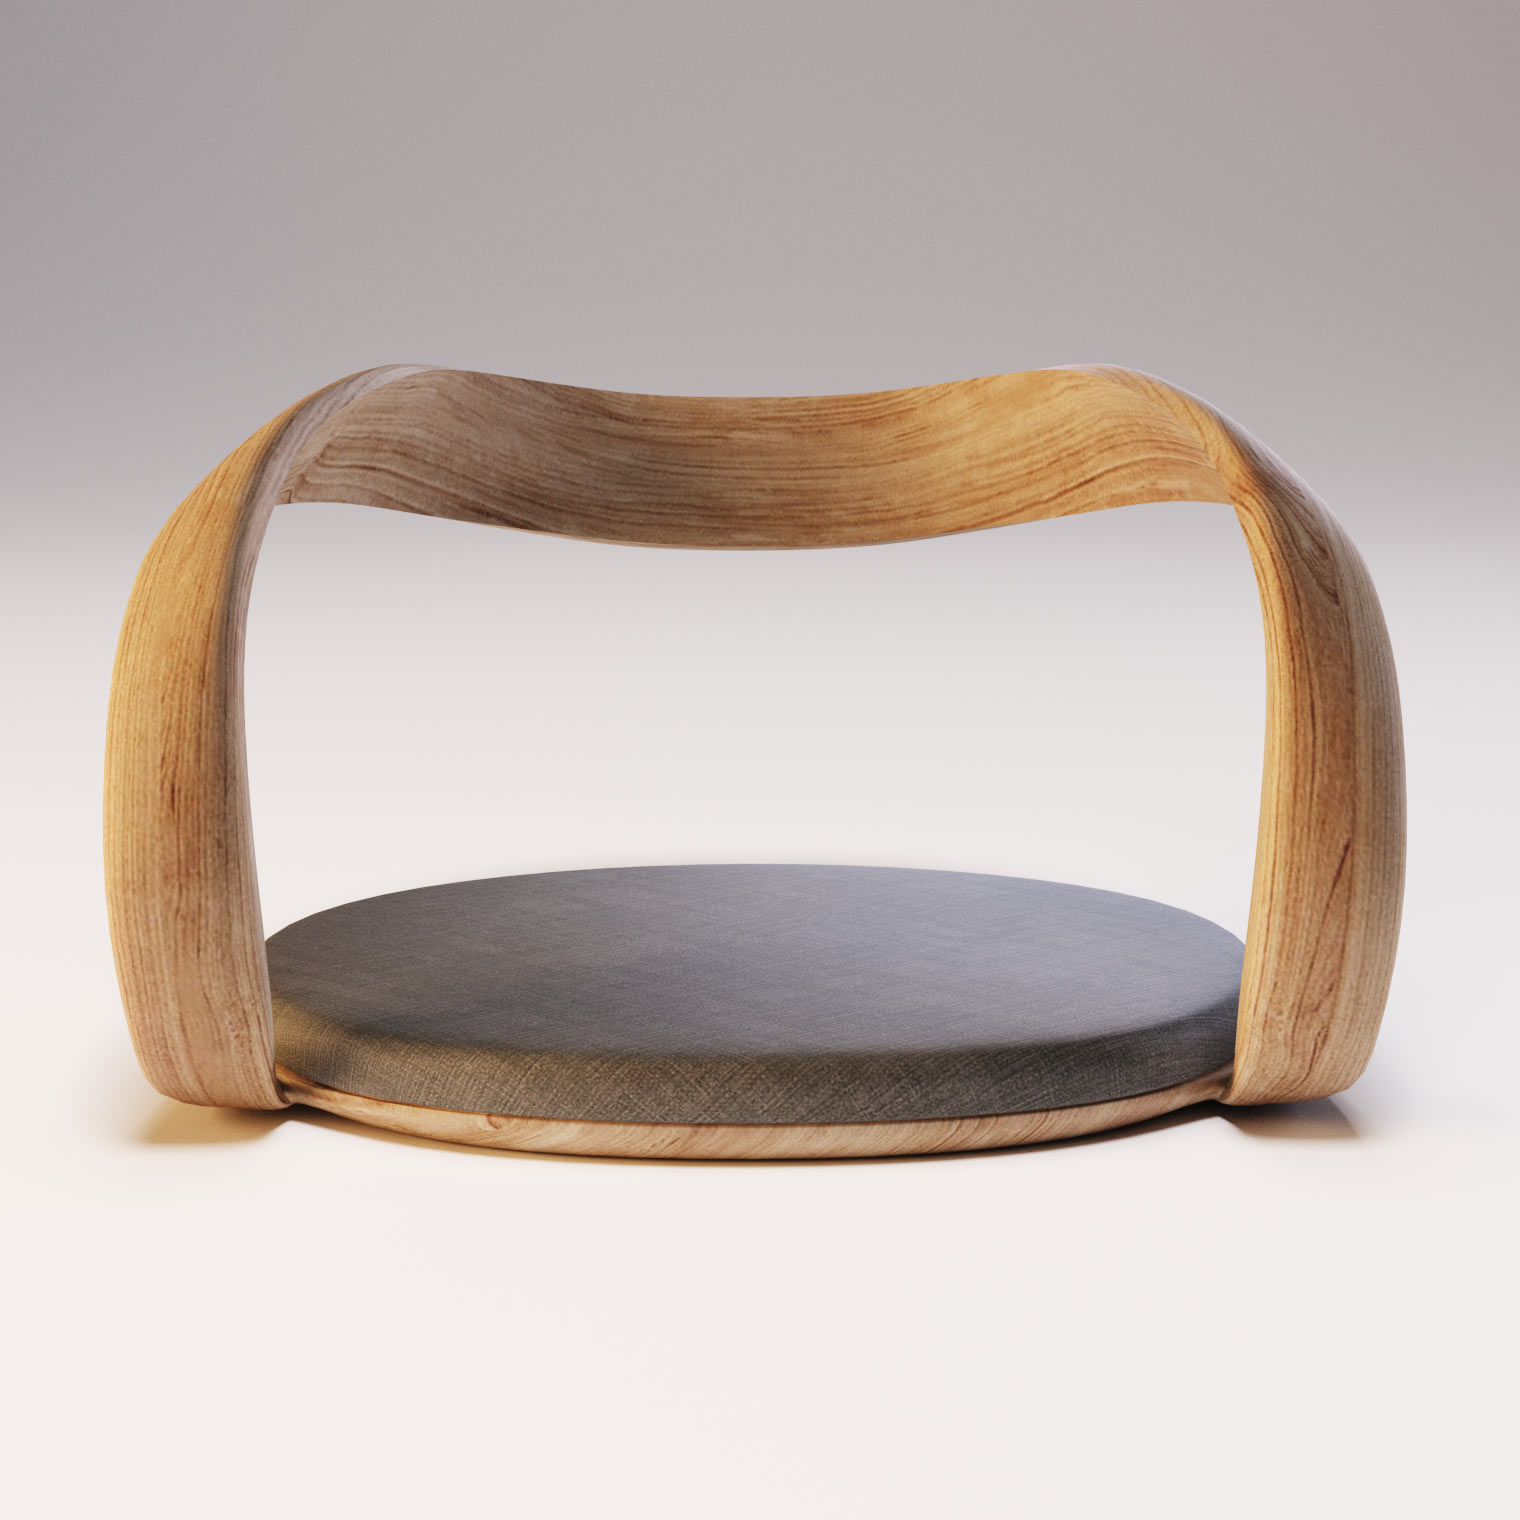 Japanese legless chair front view